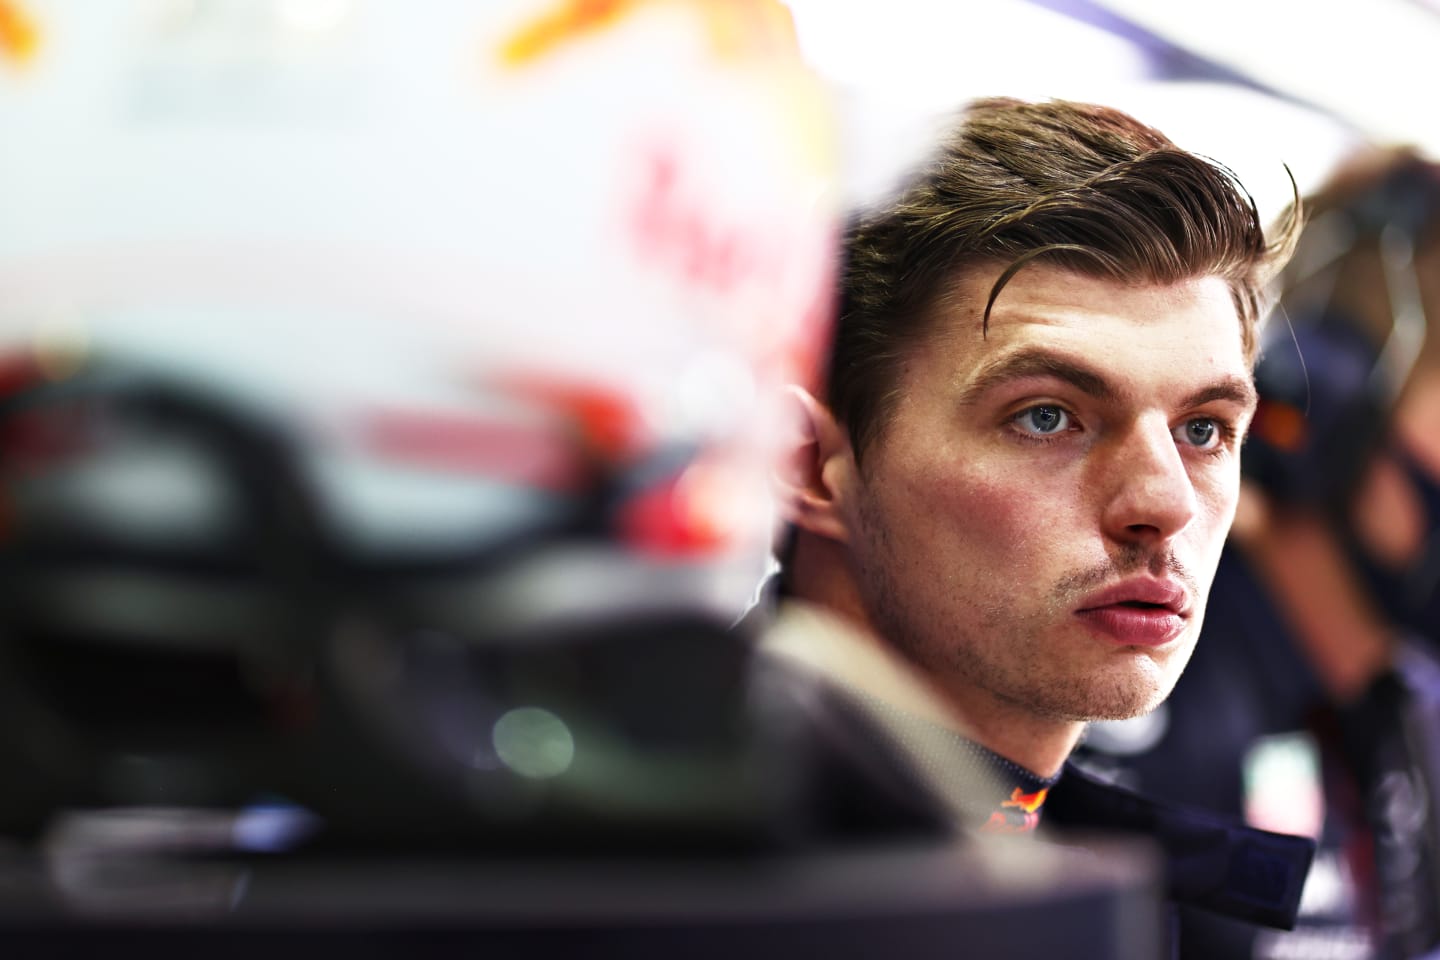 DOHA, QATAR - NOVEMBER 21: Max Verstappen of Netherlands and Red Bull Racing prepares to drive in